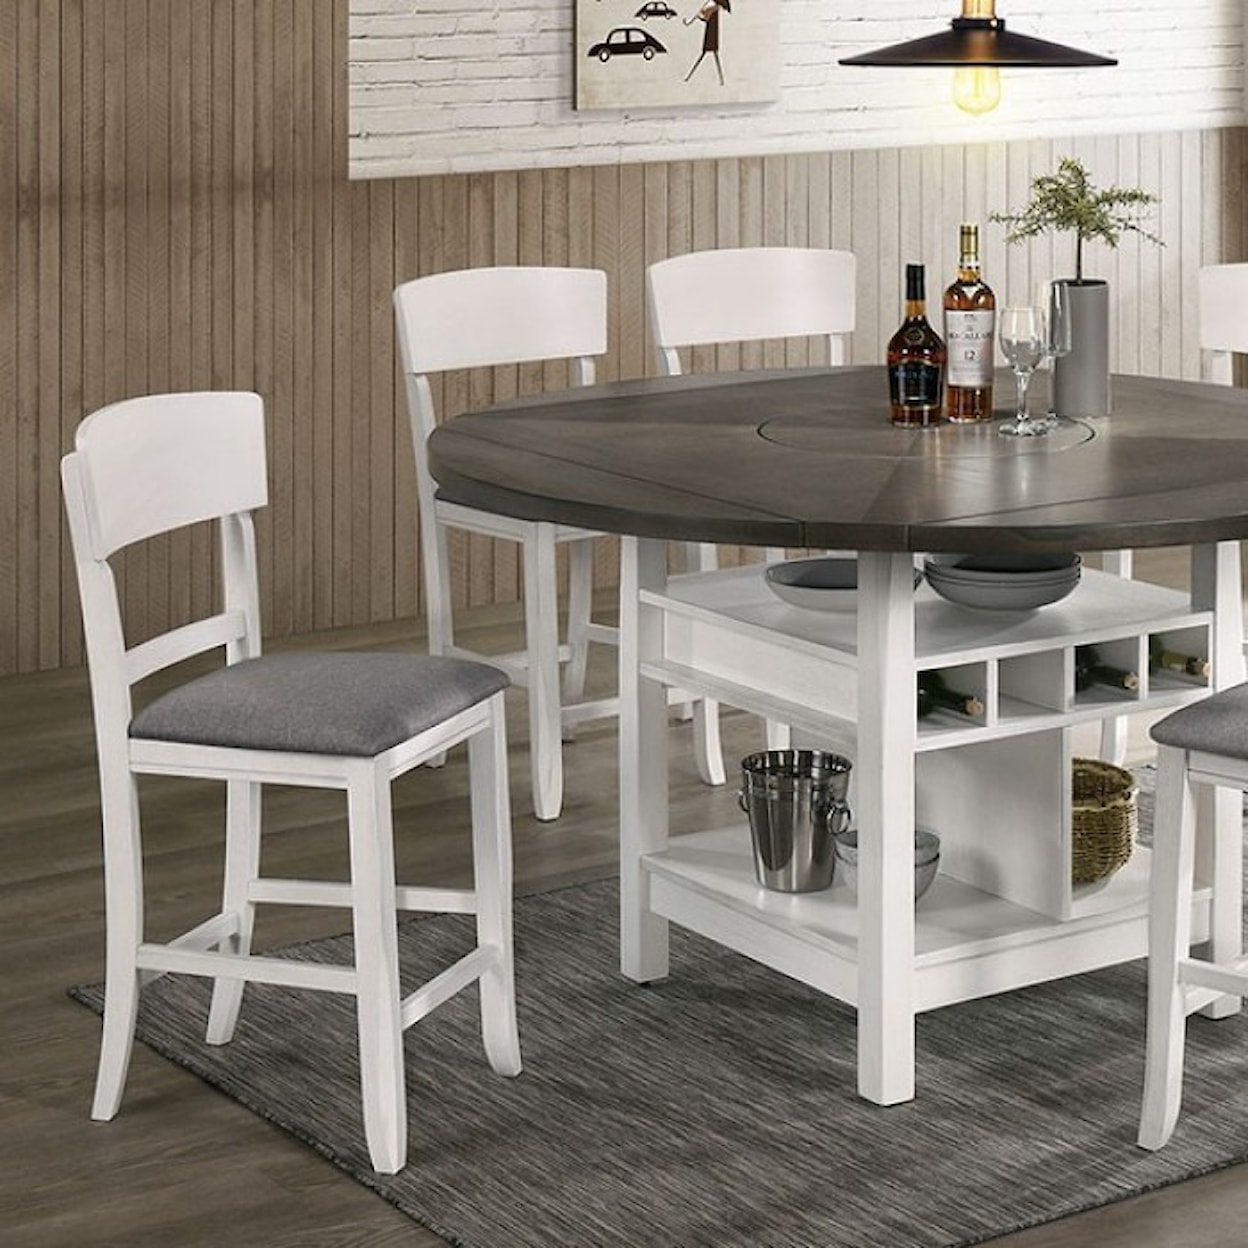 Furniture of America Stacie Counter Height Dining Set